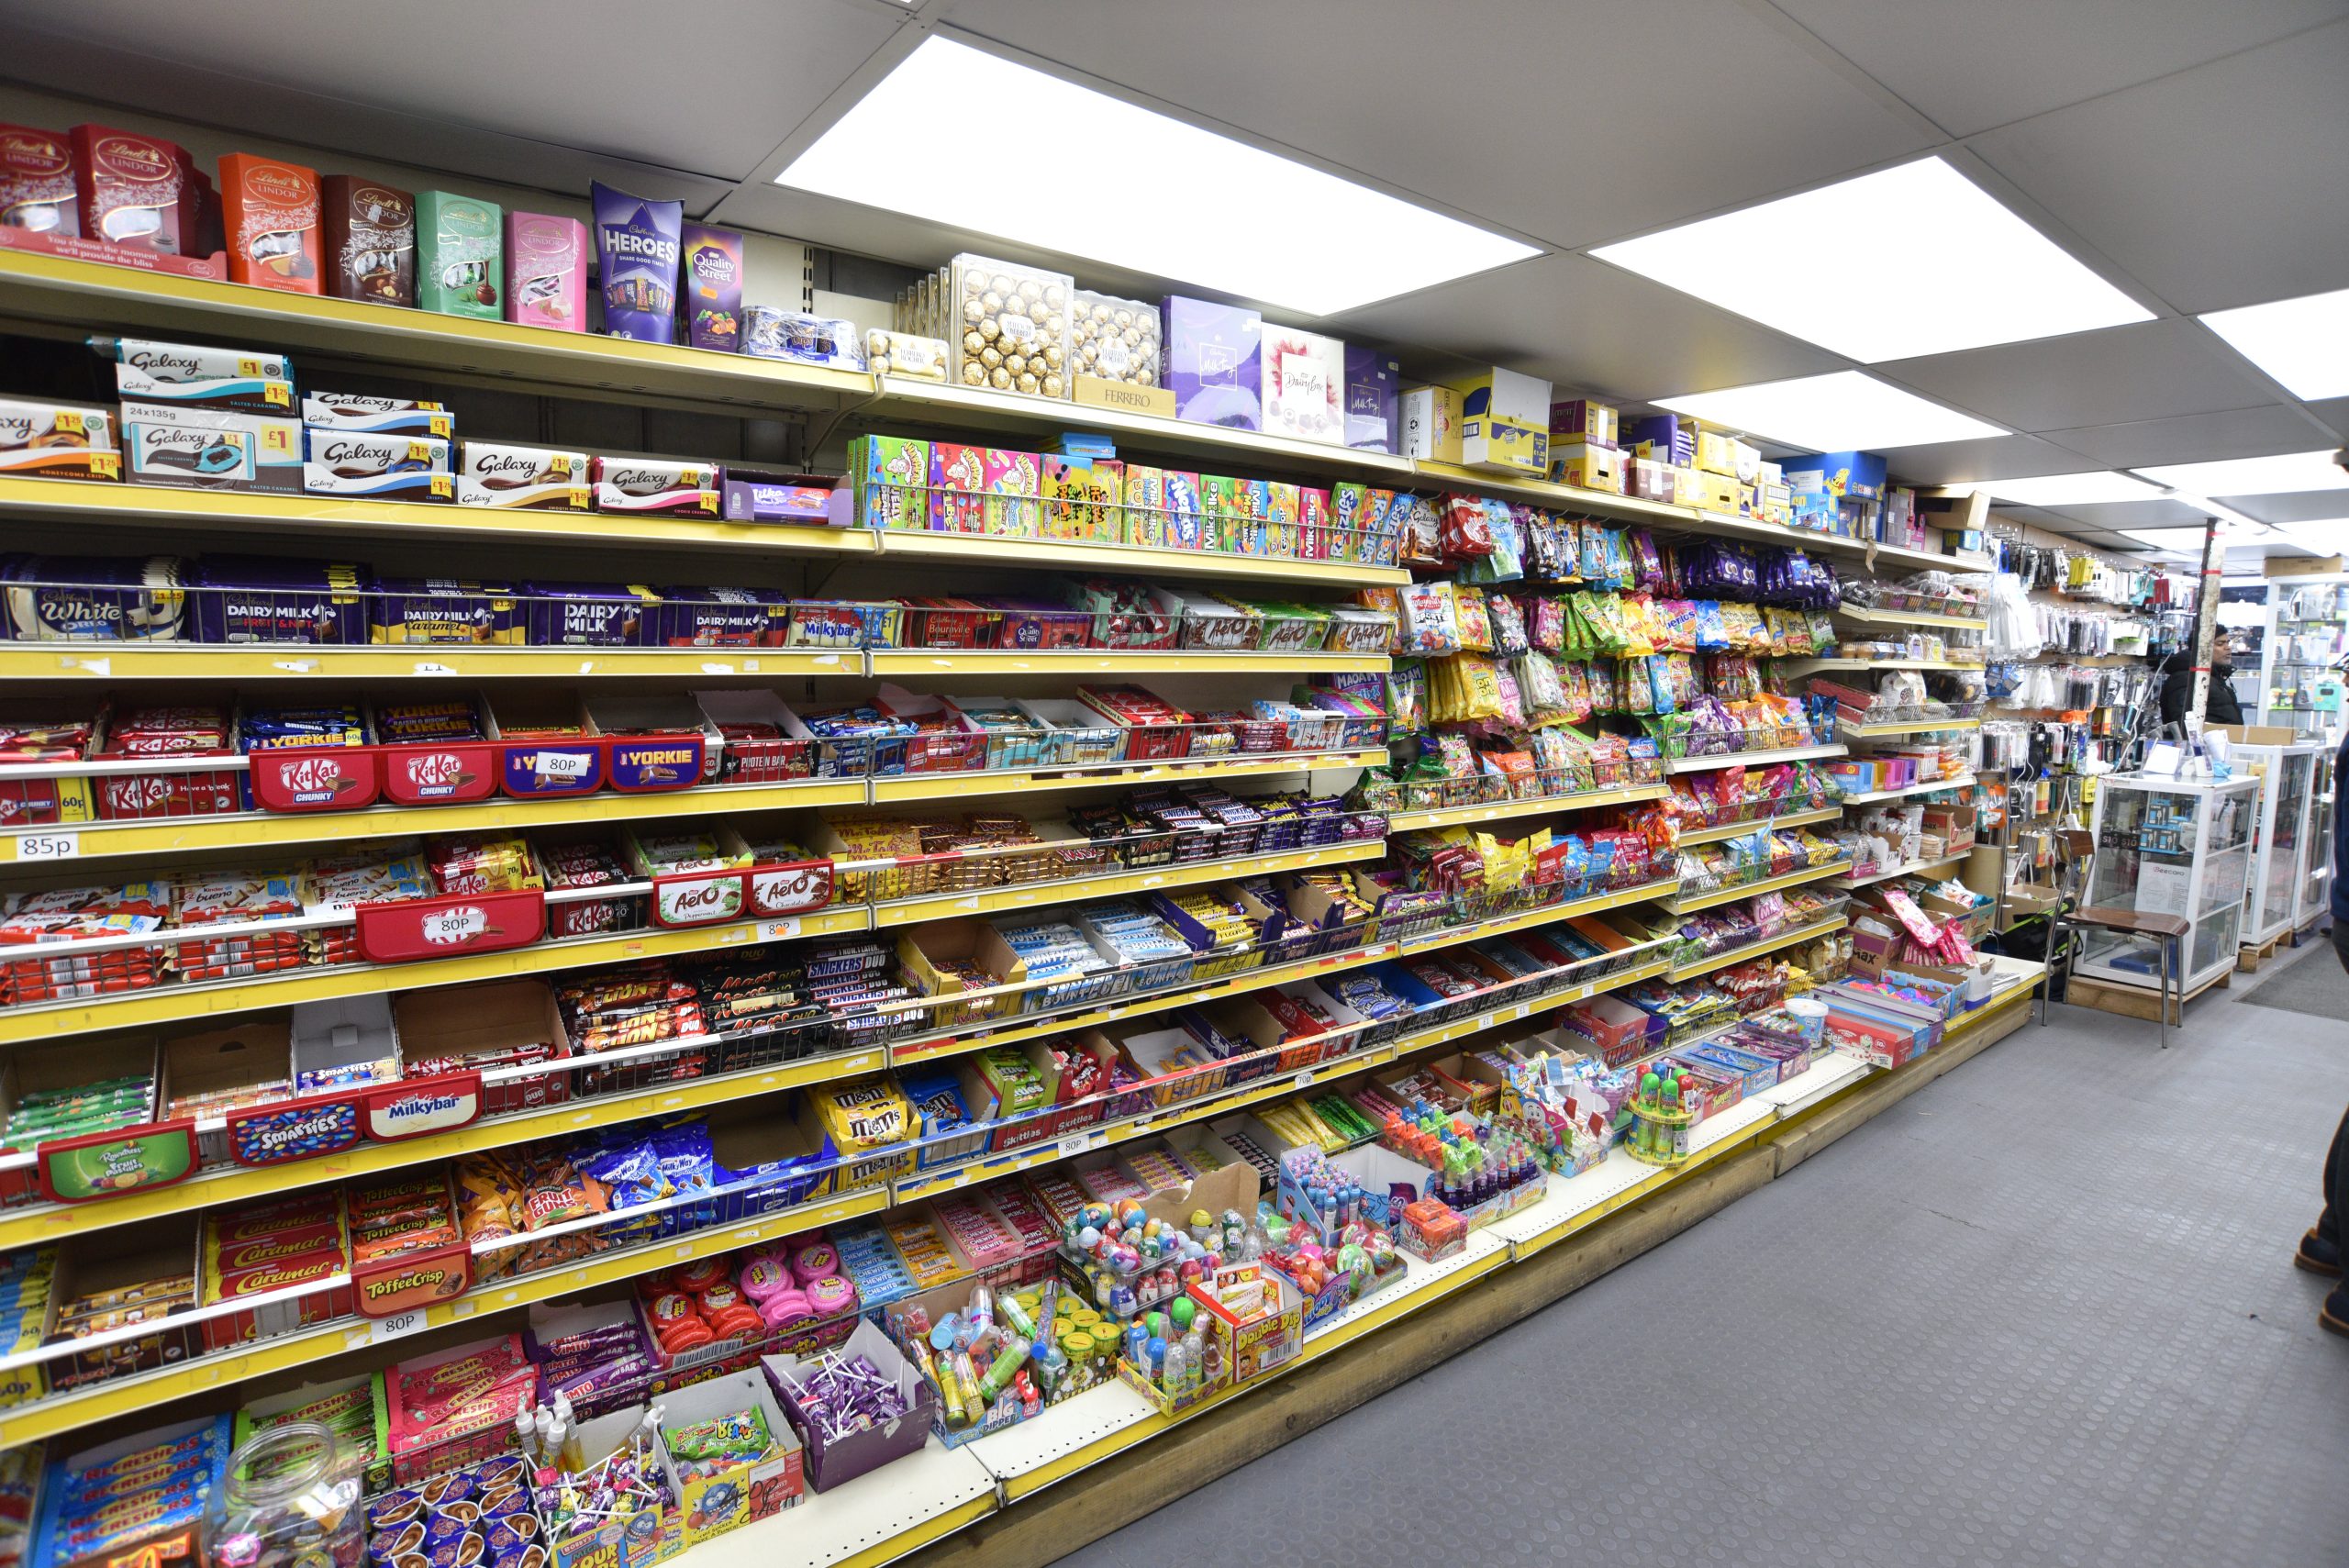 Dilip's confectionery area